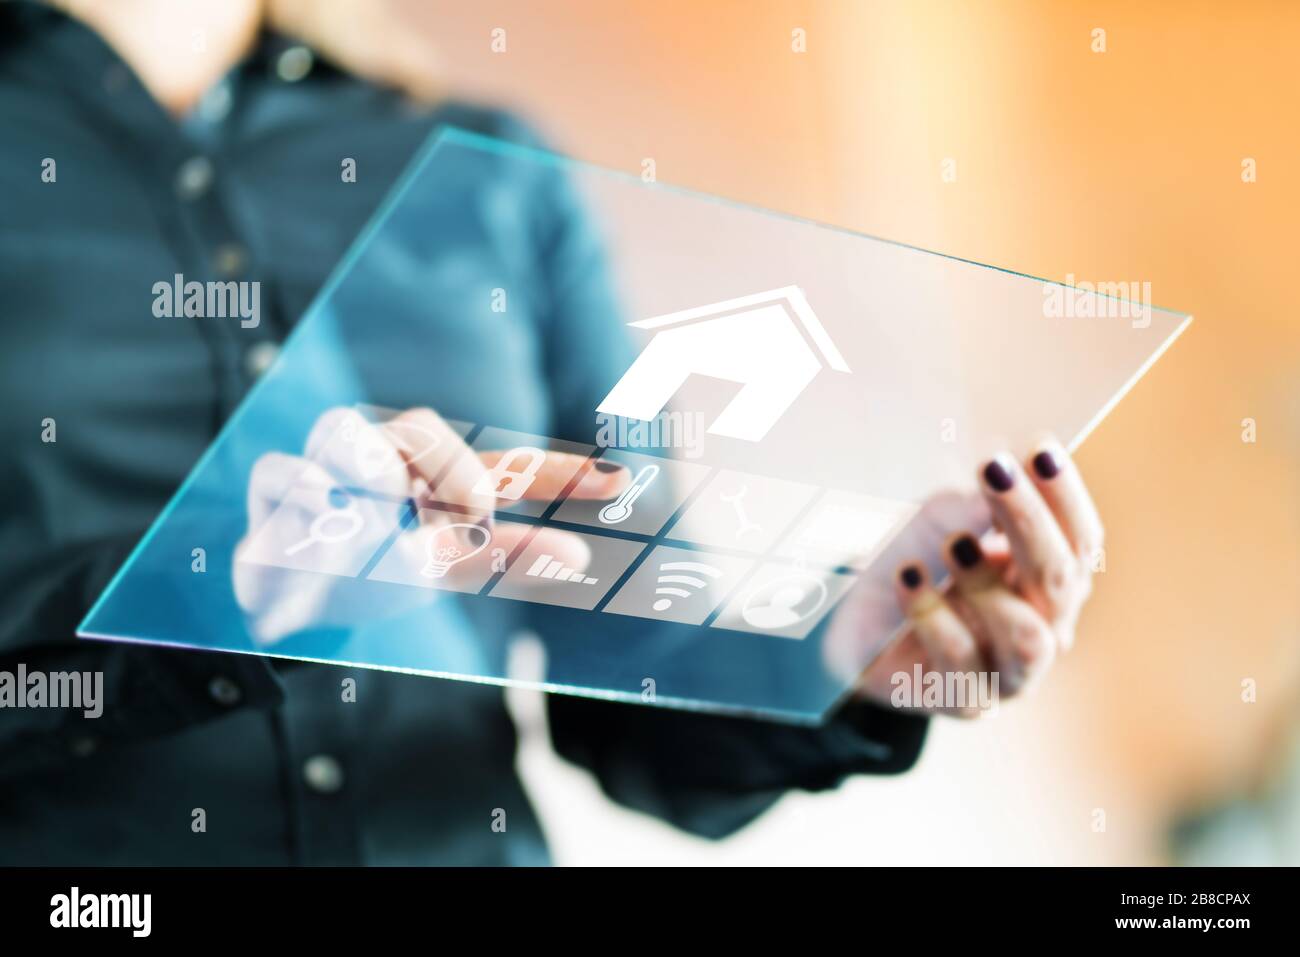 https://c8.alamy.com/comp/2B8CPAX/woman-using-smart-home-control-application-with-futuristic-transparent-glass-tablet-finger-touching-button-to-control-property-2B8CPAX.jpg